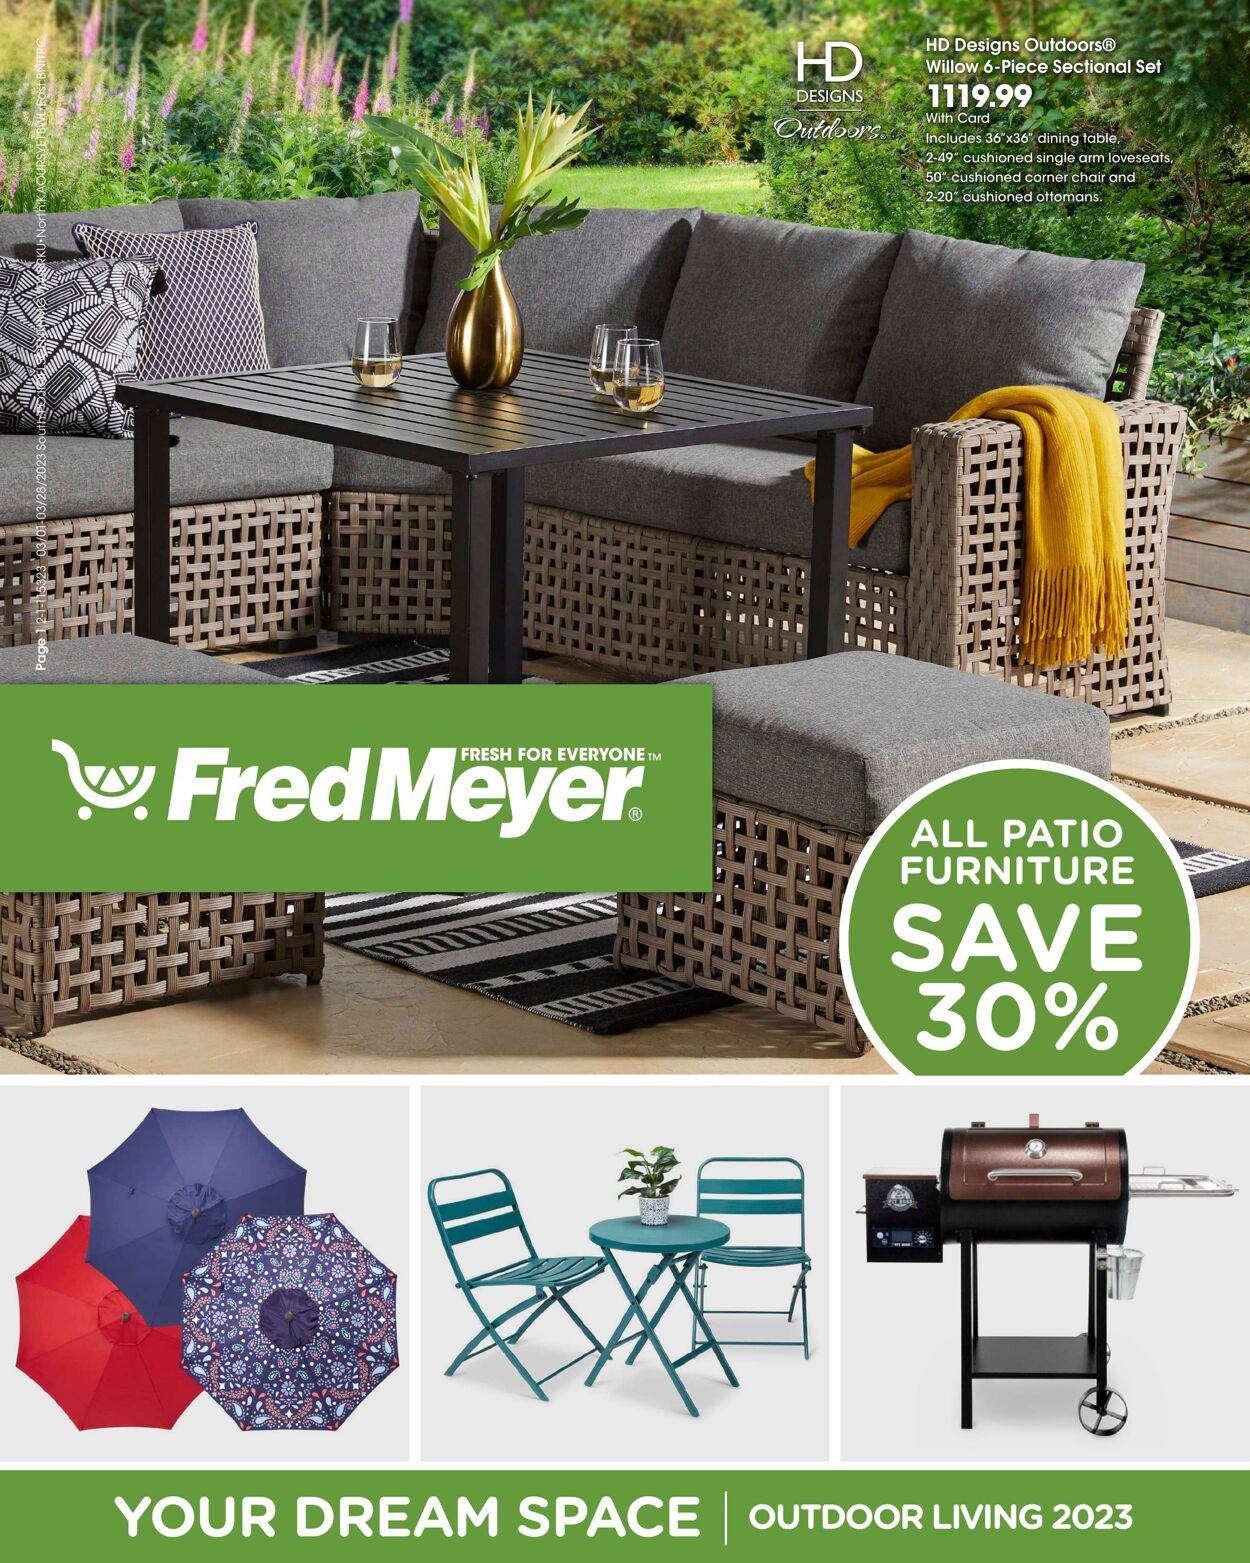 Weekly ad Fred Meyer 03/01/2023 - 03/28/2023